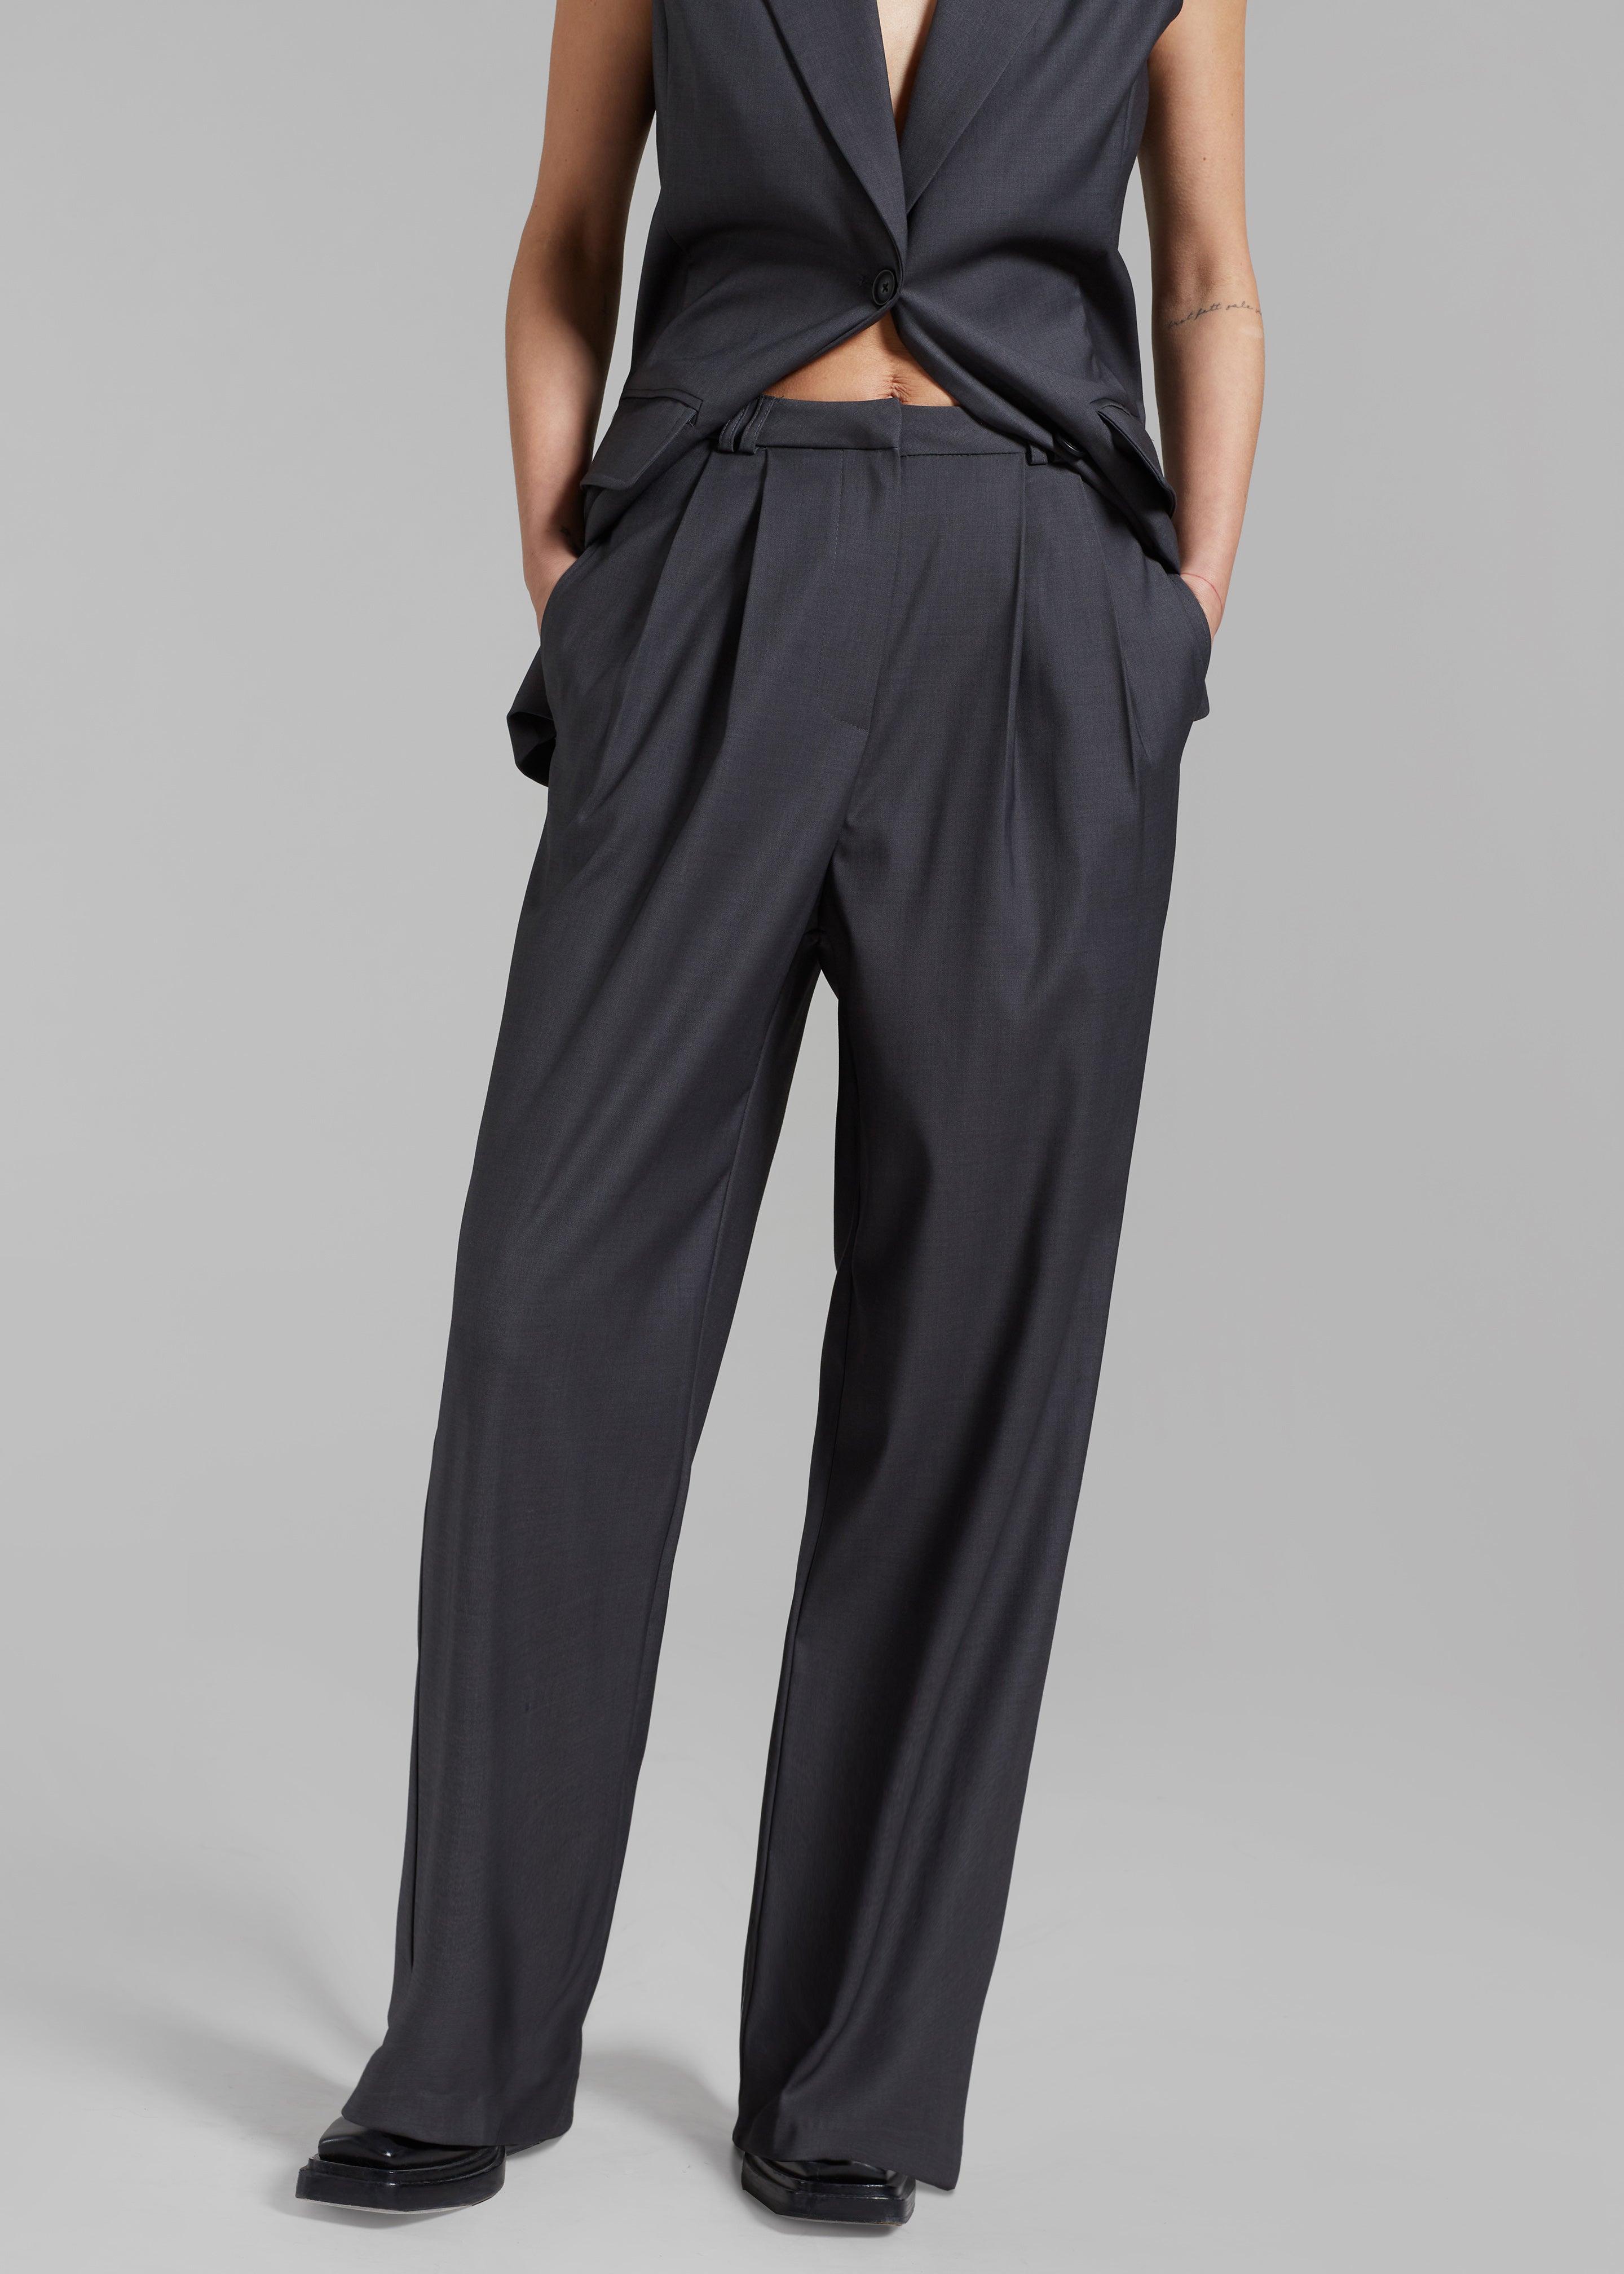 Durban Trousers - Charcoal - 2